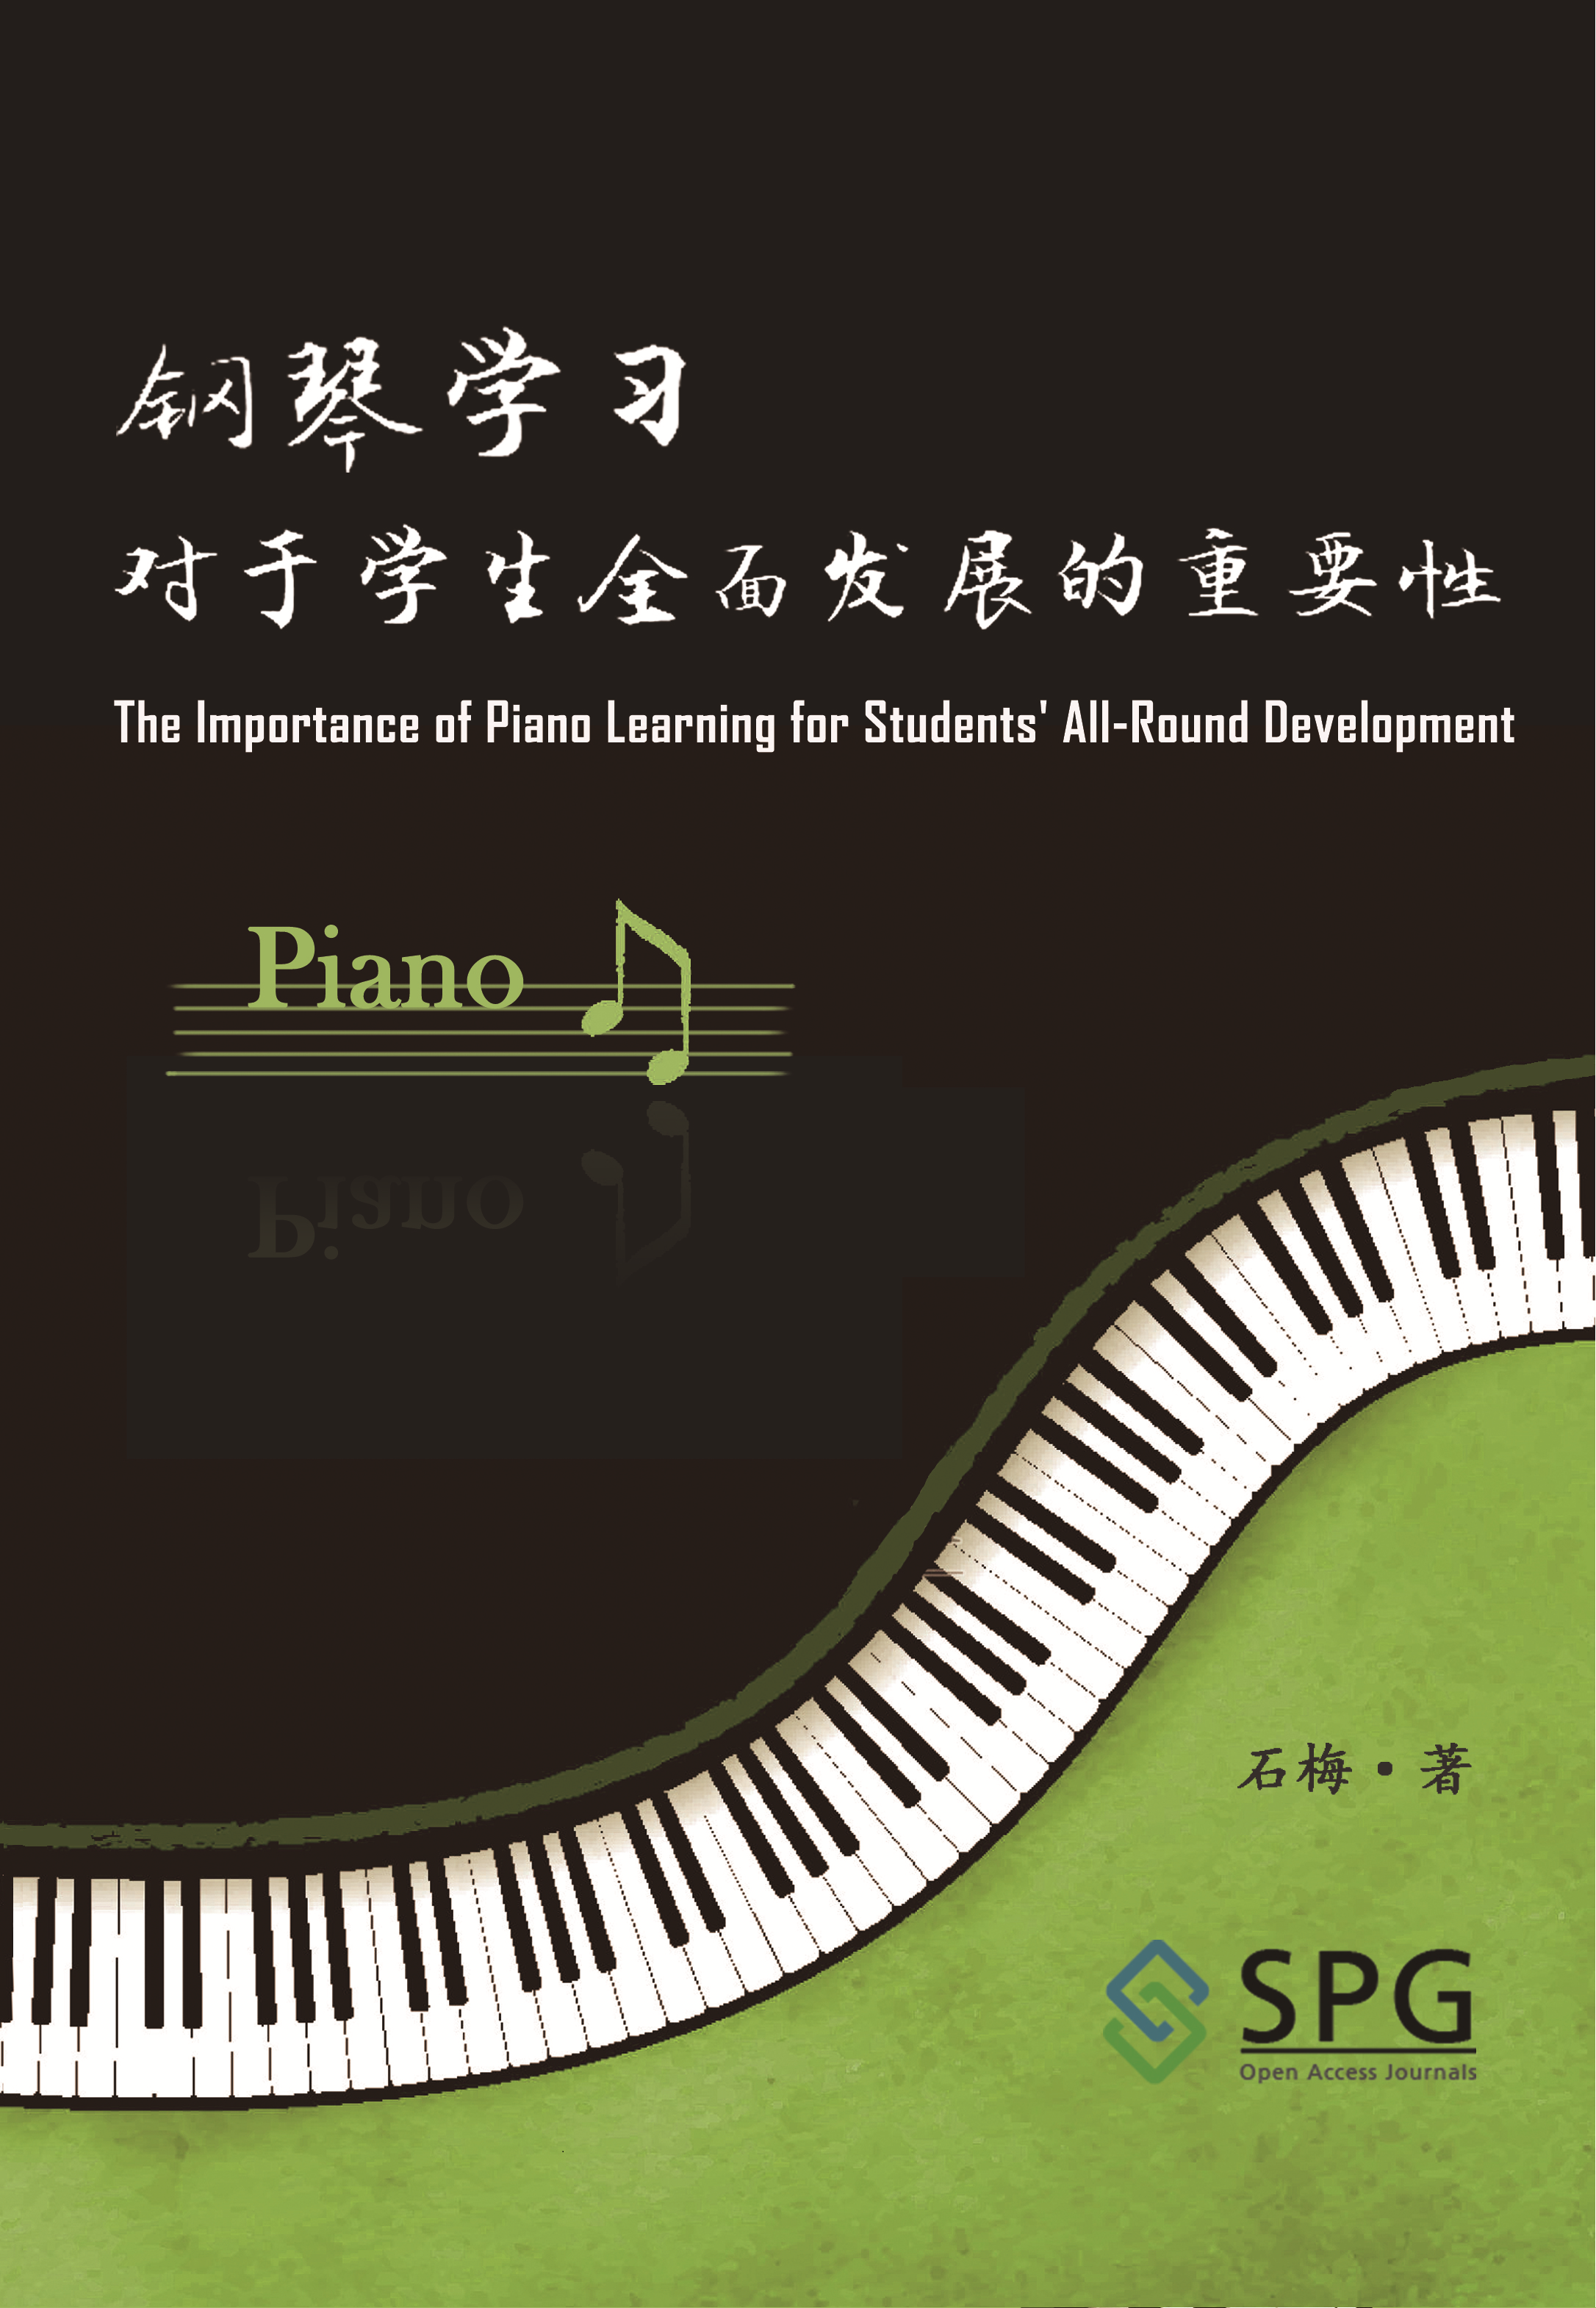 The Importance of Piano Learning for Students' All-Round Development | Scholar Publishing Group